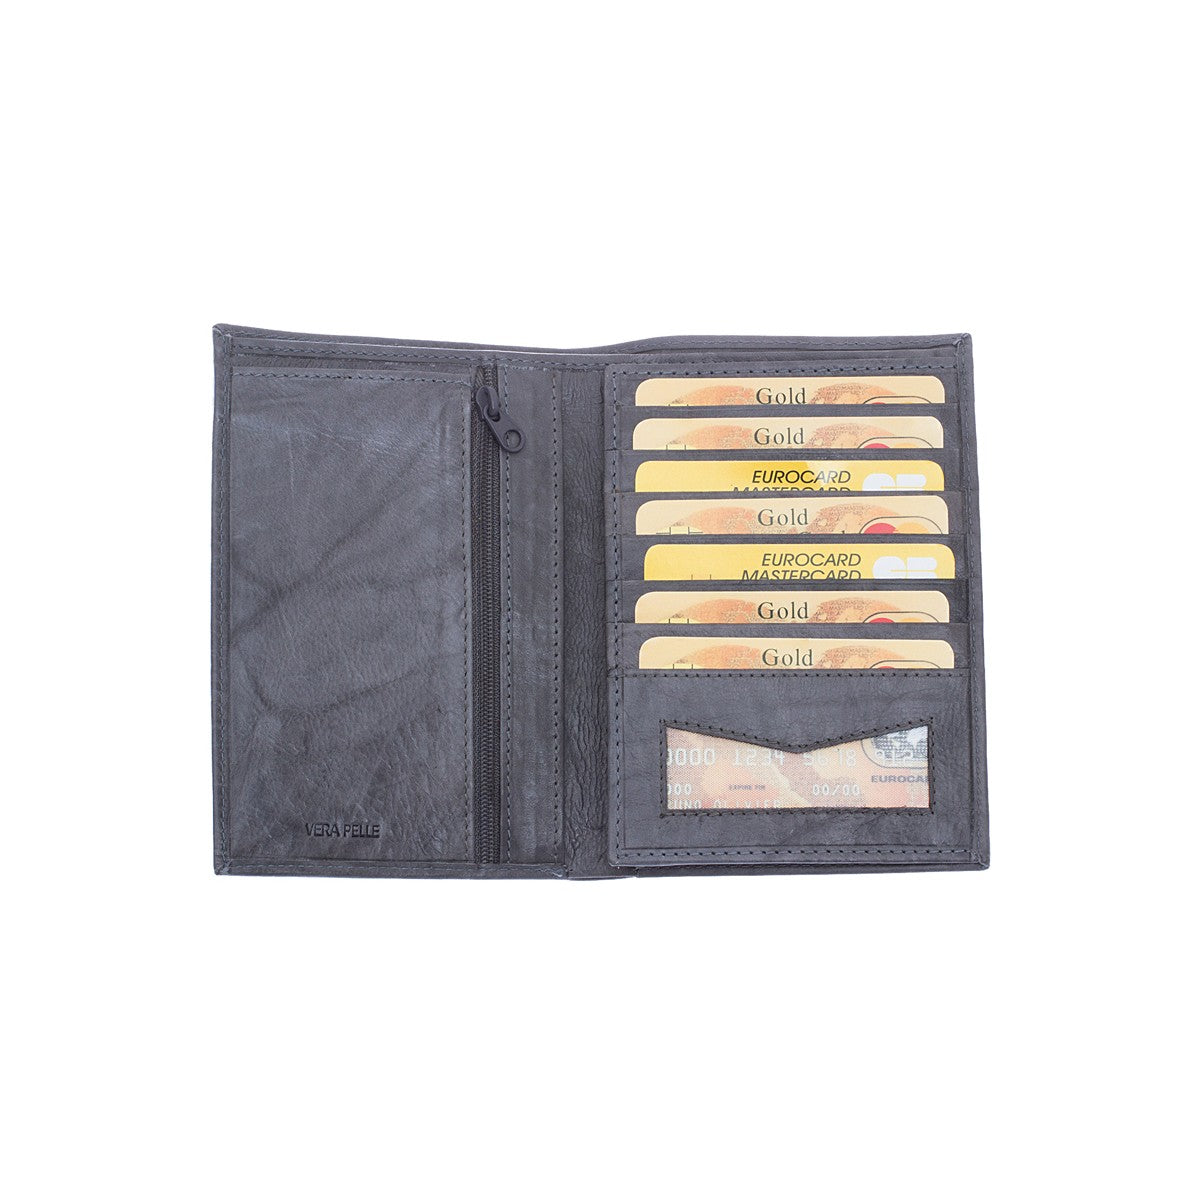 Sauvage men's wallet in blue calf leather for banknote cards and side flap